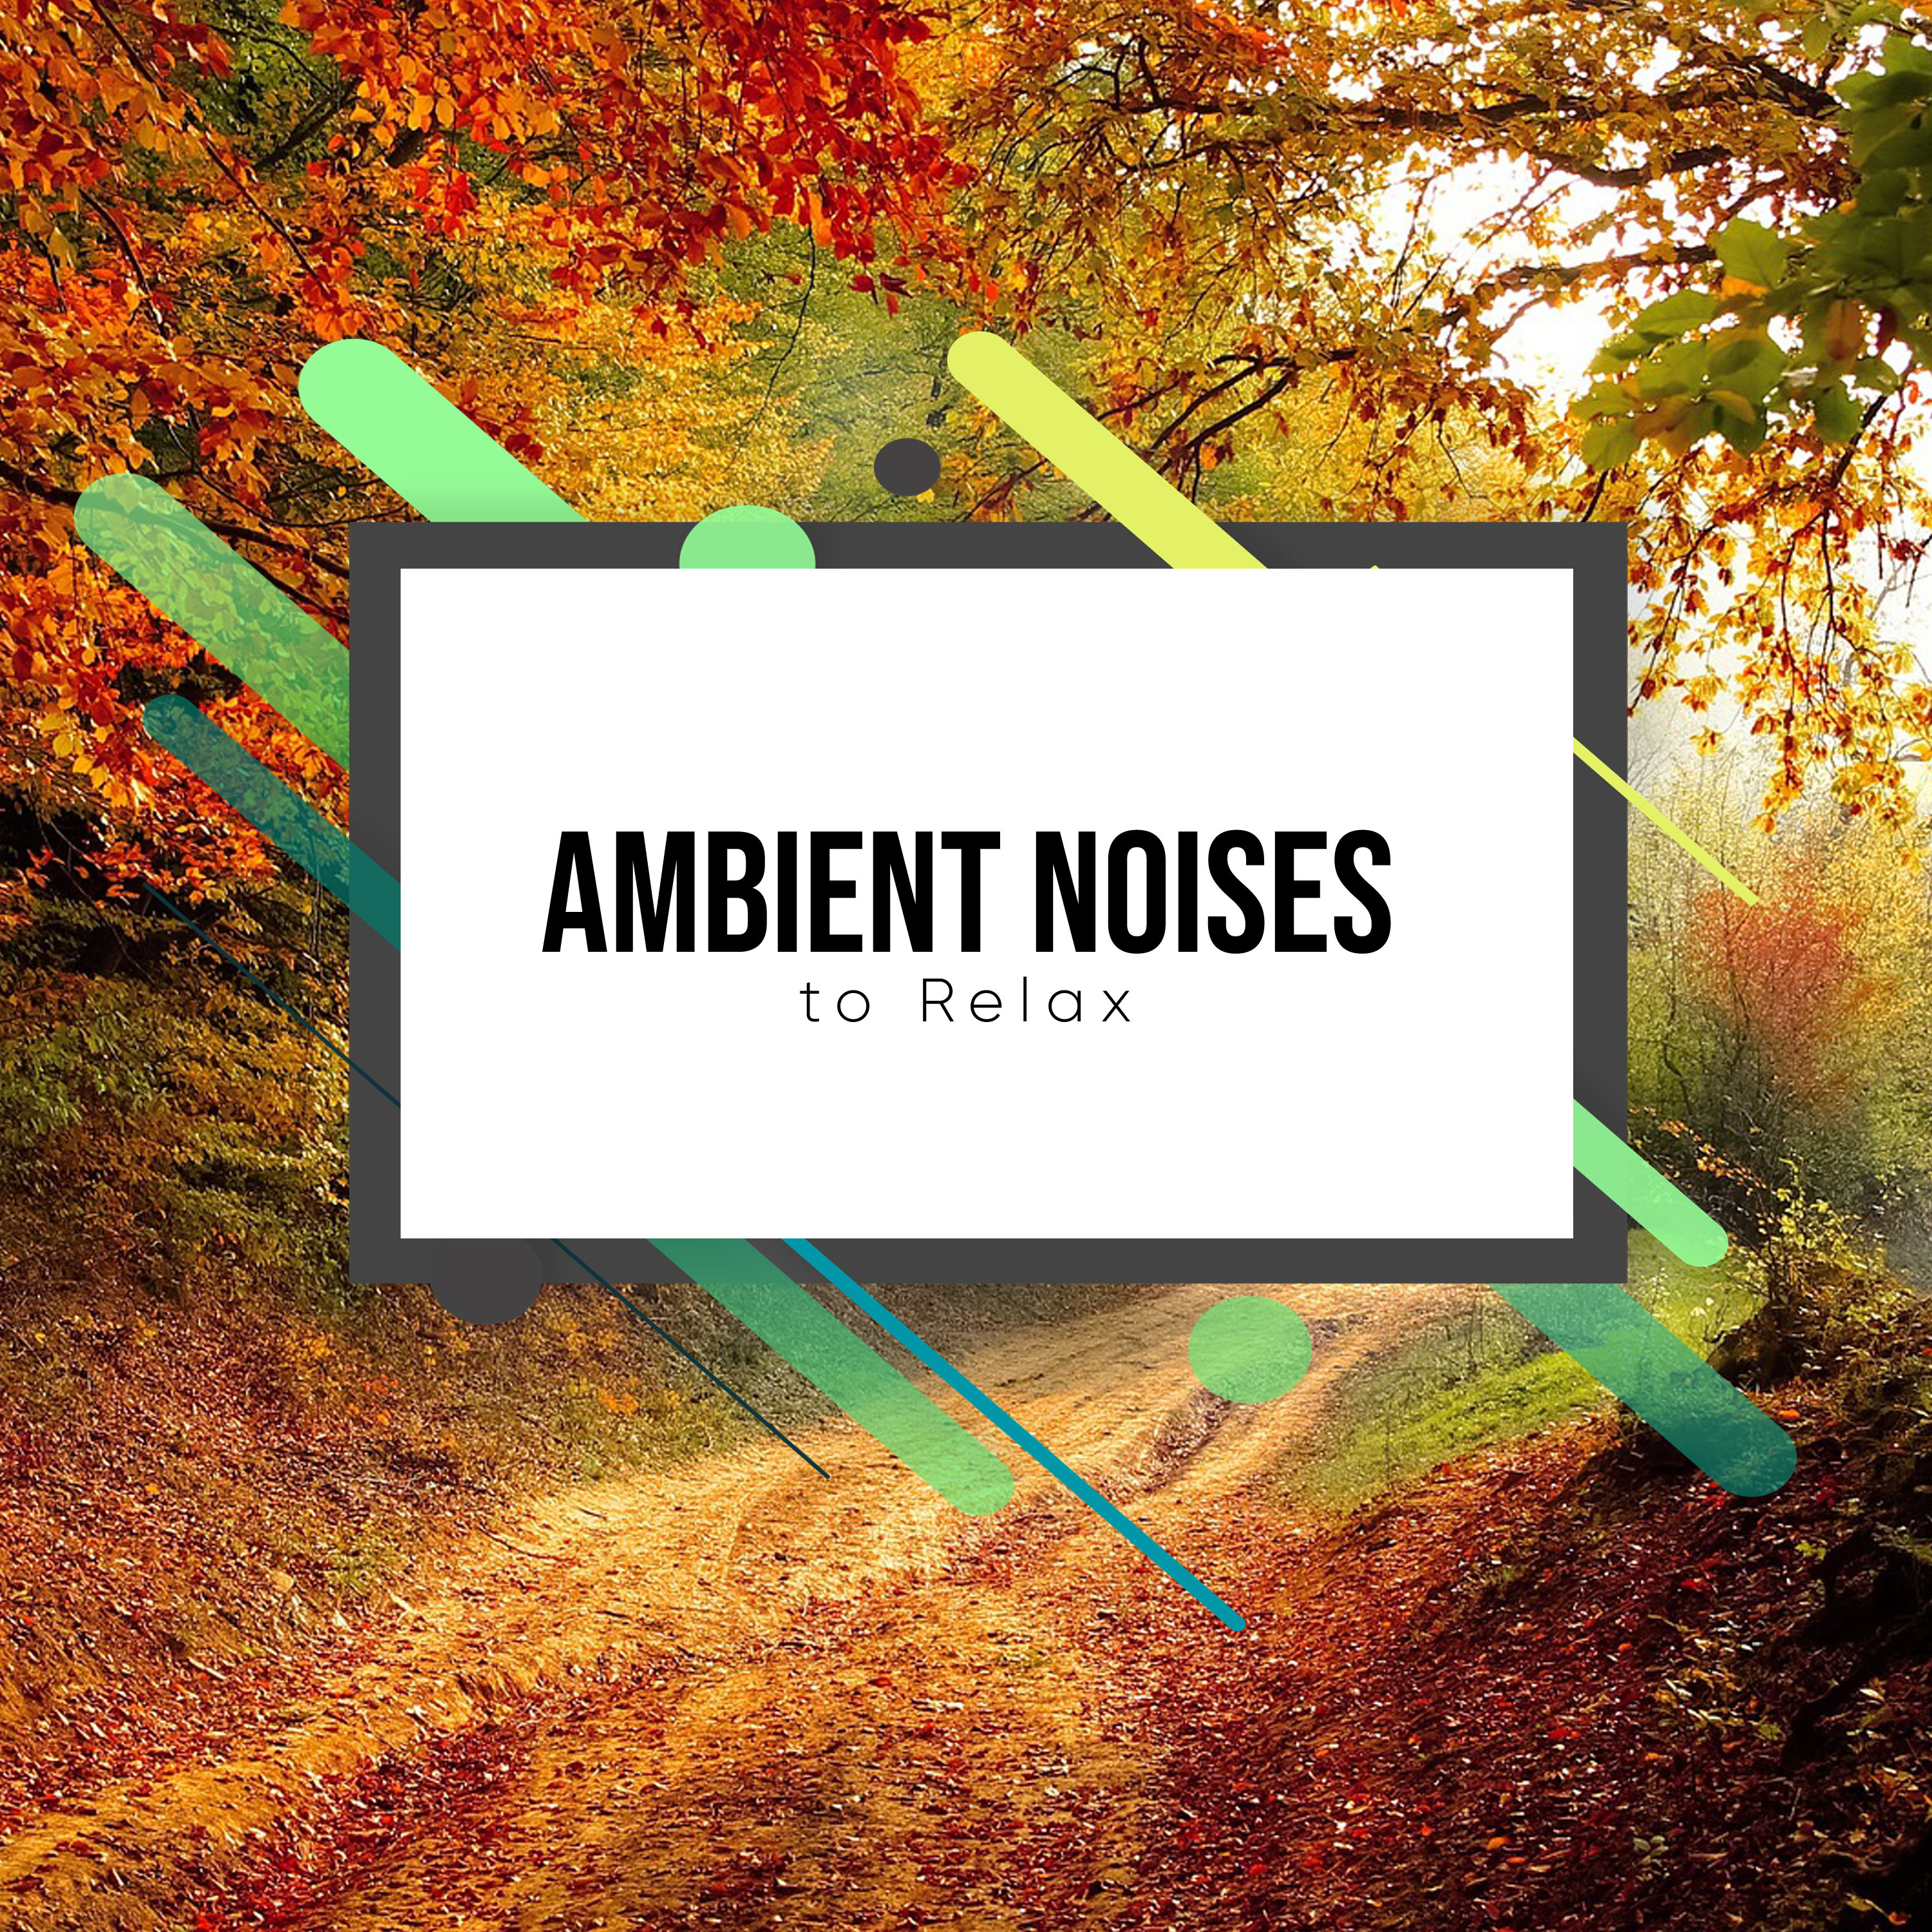 12 Relaxing, Ambient Noises to Relax